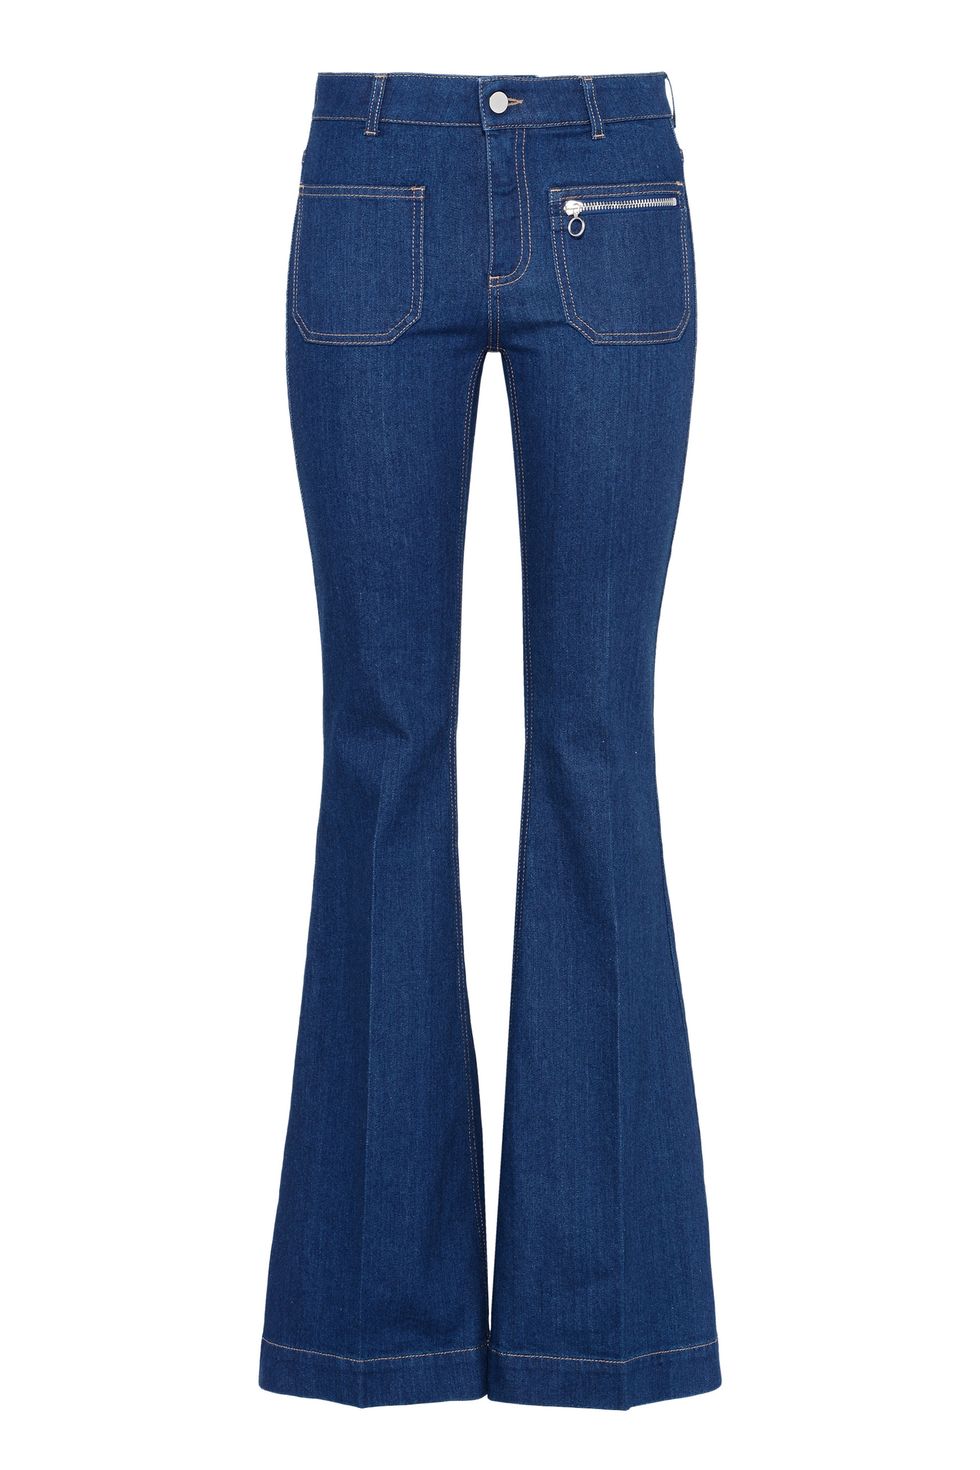 23 Flared Jeans For Fall - Best Pairs of Flared Jeans for Fall